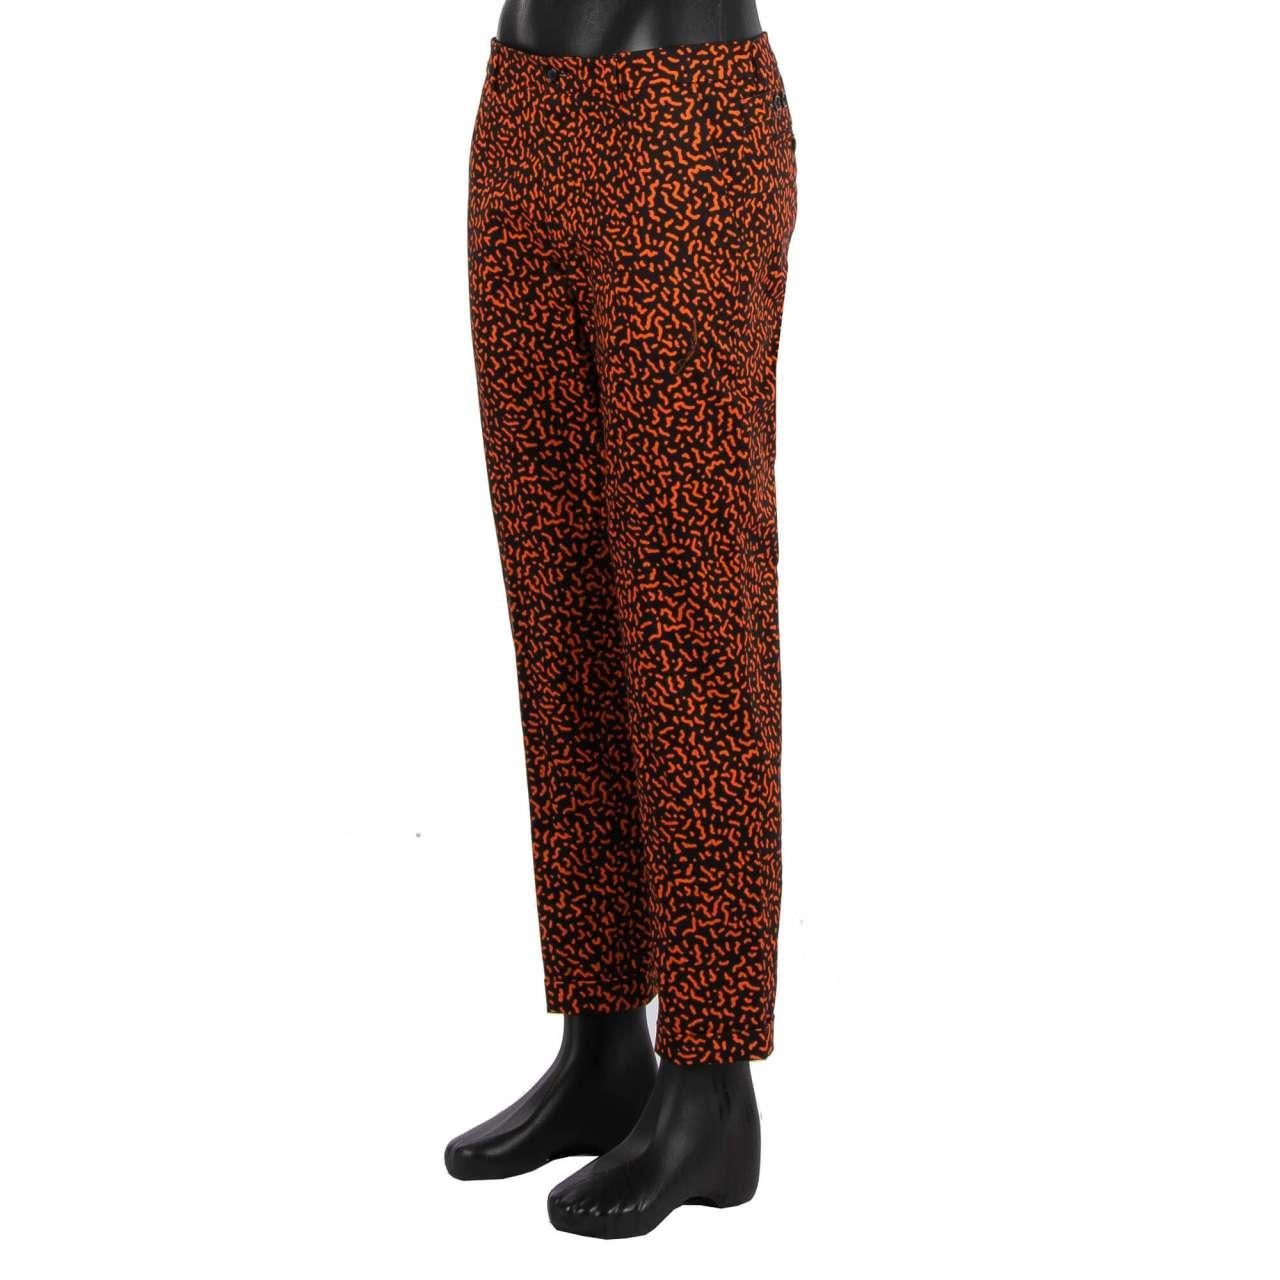 - Classic / Dress Cotton Trousers with print by DOLCE & GABBANA - New with tag - MADE IN ITALY - Former RRP: EUR 695 - Tailored F- Model: GY6IET-FSFGO-HNFFO - Material: 97% Cotton, 3% Elastan - Color: Black / Orange - 4 pockets - Adjustable waist